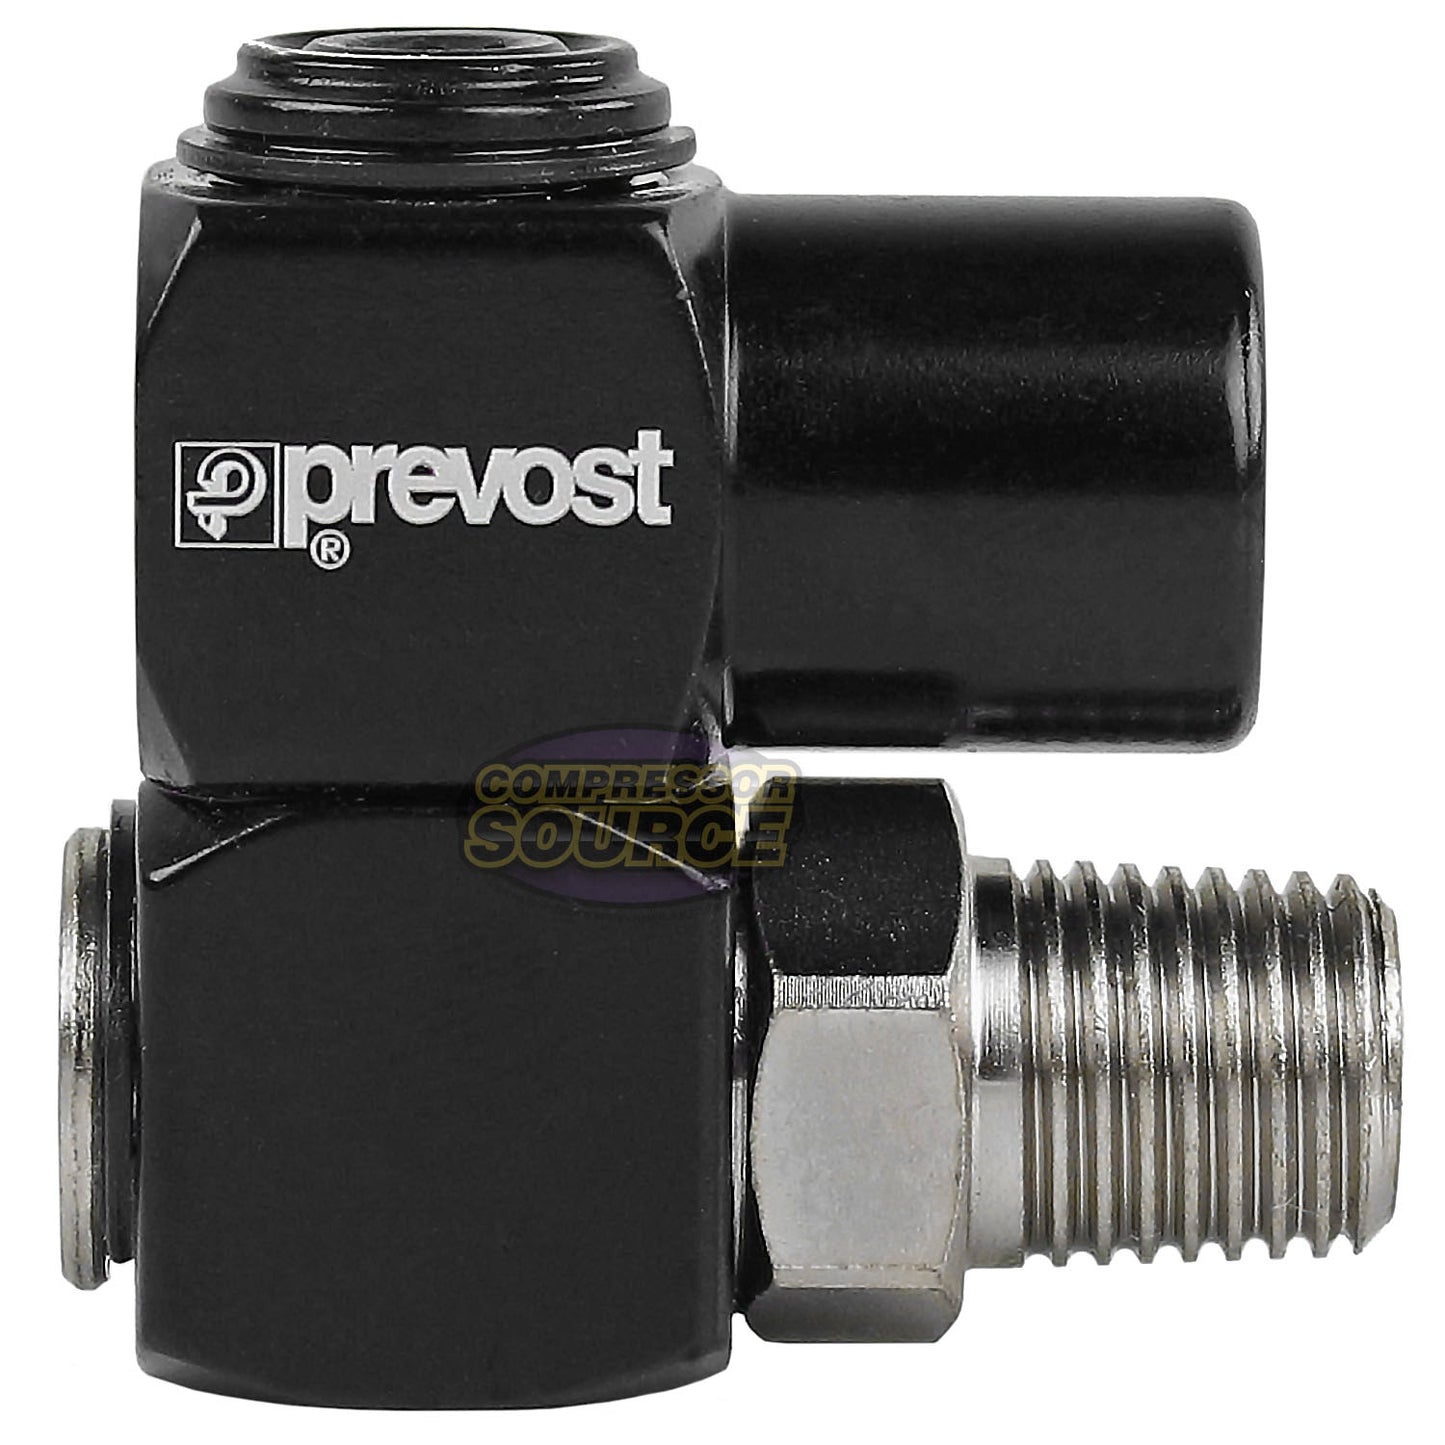 5 Prevost Universal 360 1/4" NPT Compressed Air Flow Tool Hose Connection Swivel